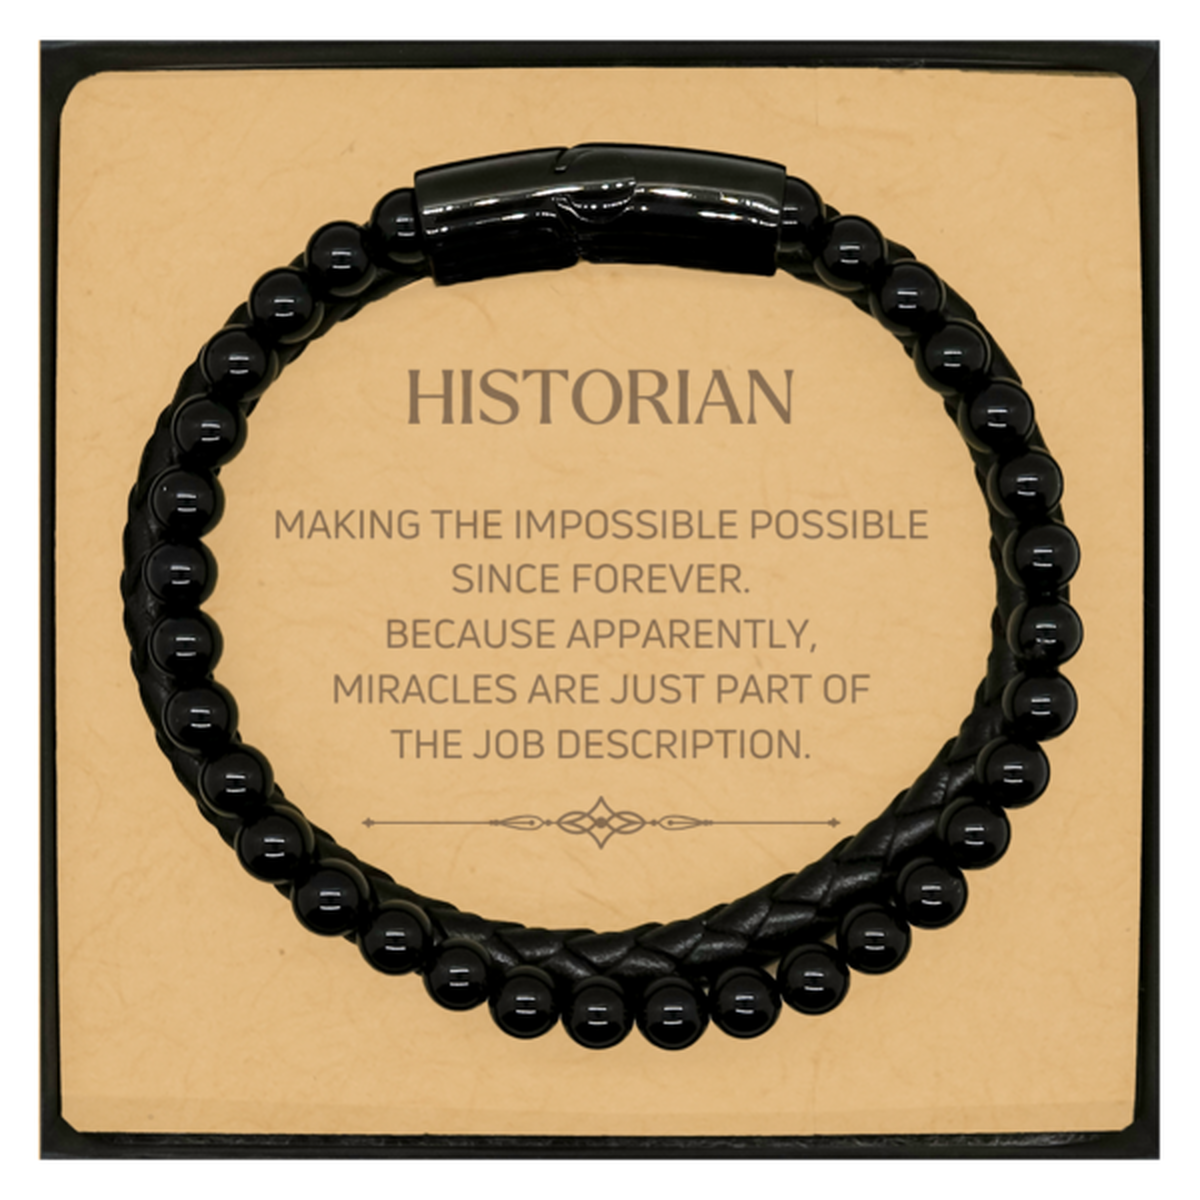 Funny Historian Gifts, Miracles are just part of the job description, Inspirational Birthday Christmas Stone Leather Bracelets For Historian, Men, Women, Coworkers, Friends, Boss